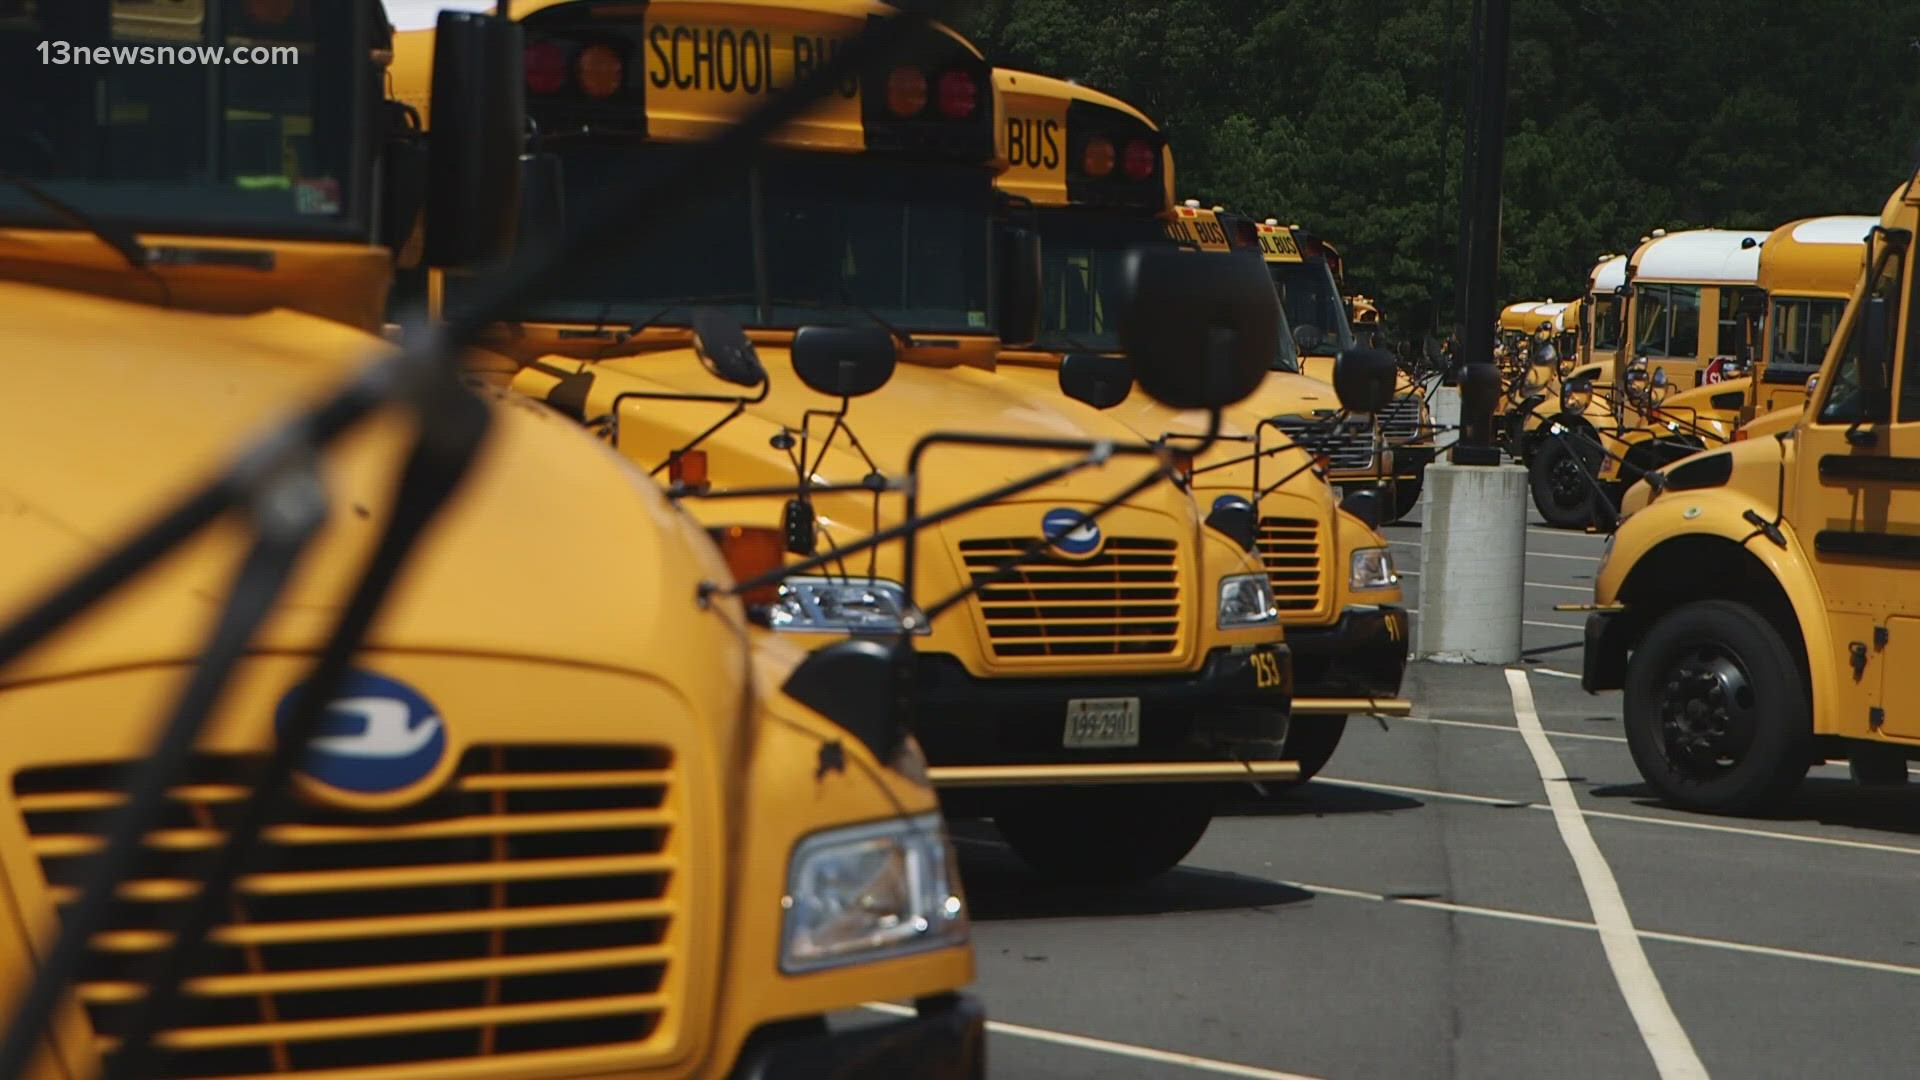 The Virginia Beach School Board is holding six meetings on Tuesday and Wednesday for public comment on the search for the next superintendent.